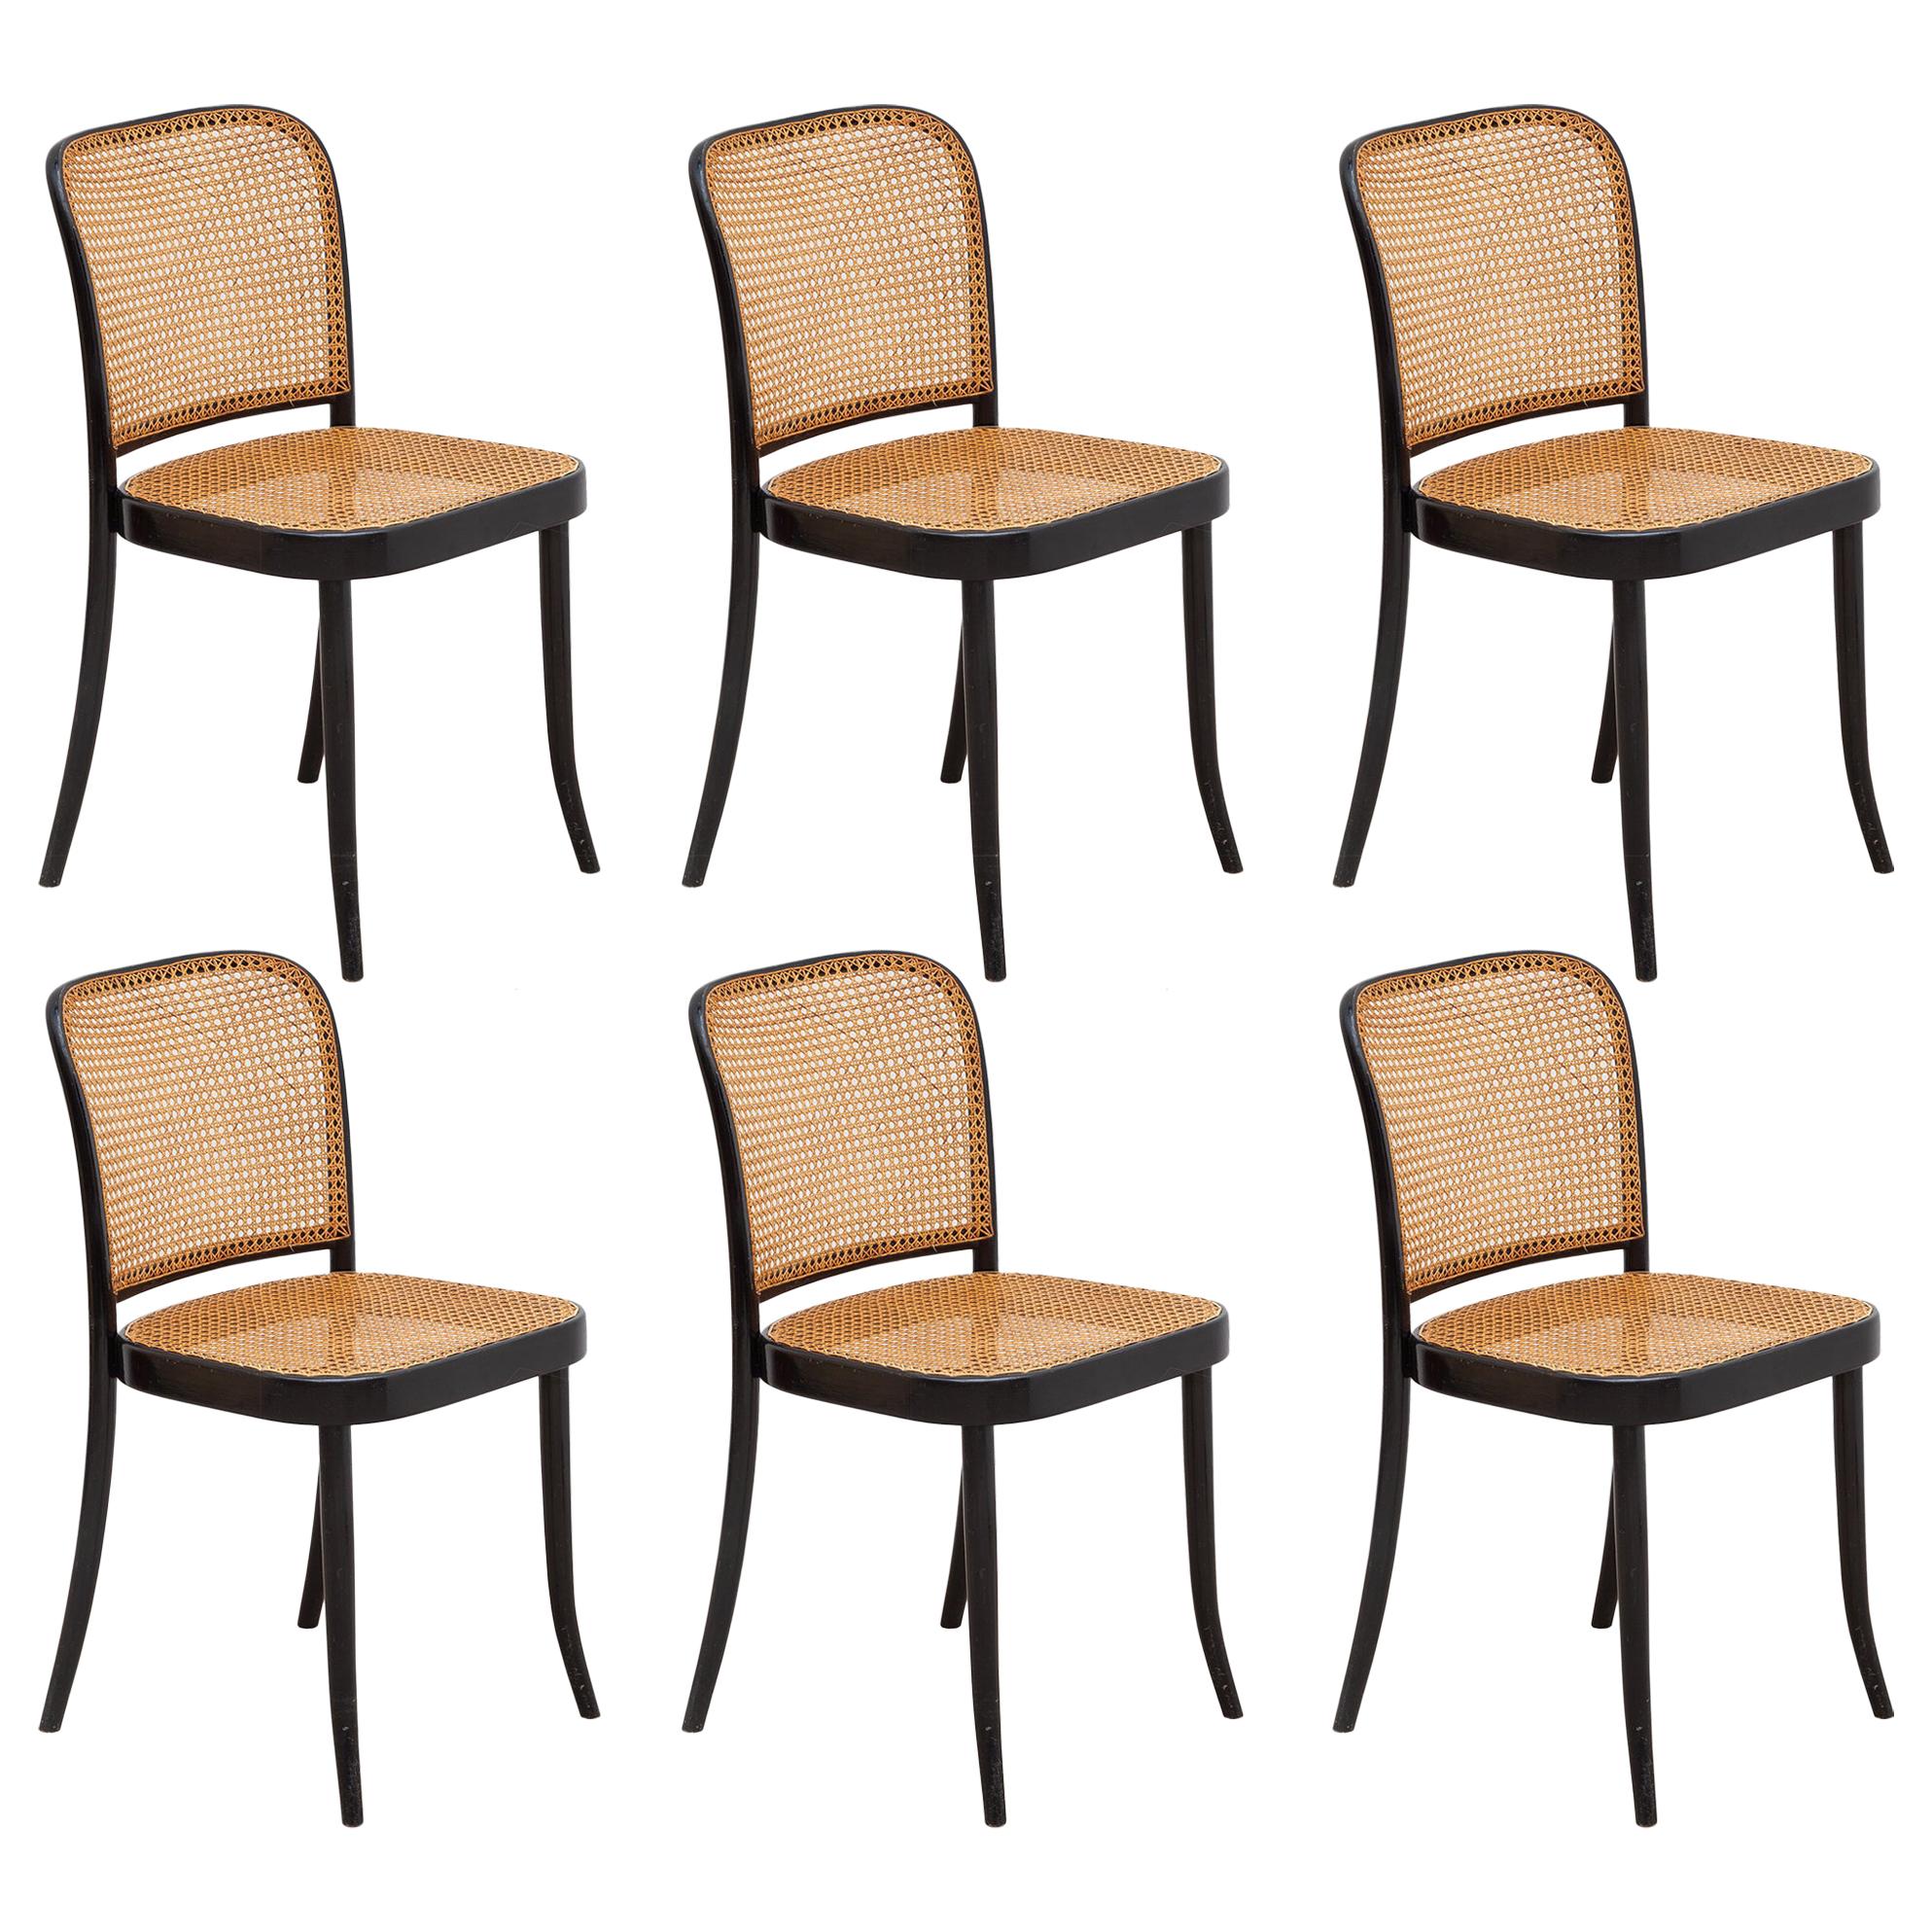 Set of Six Bentwood Cane Dining Chairs Designed by Josef Hoffman for Thonet